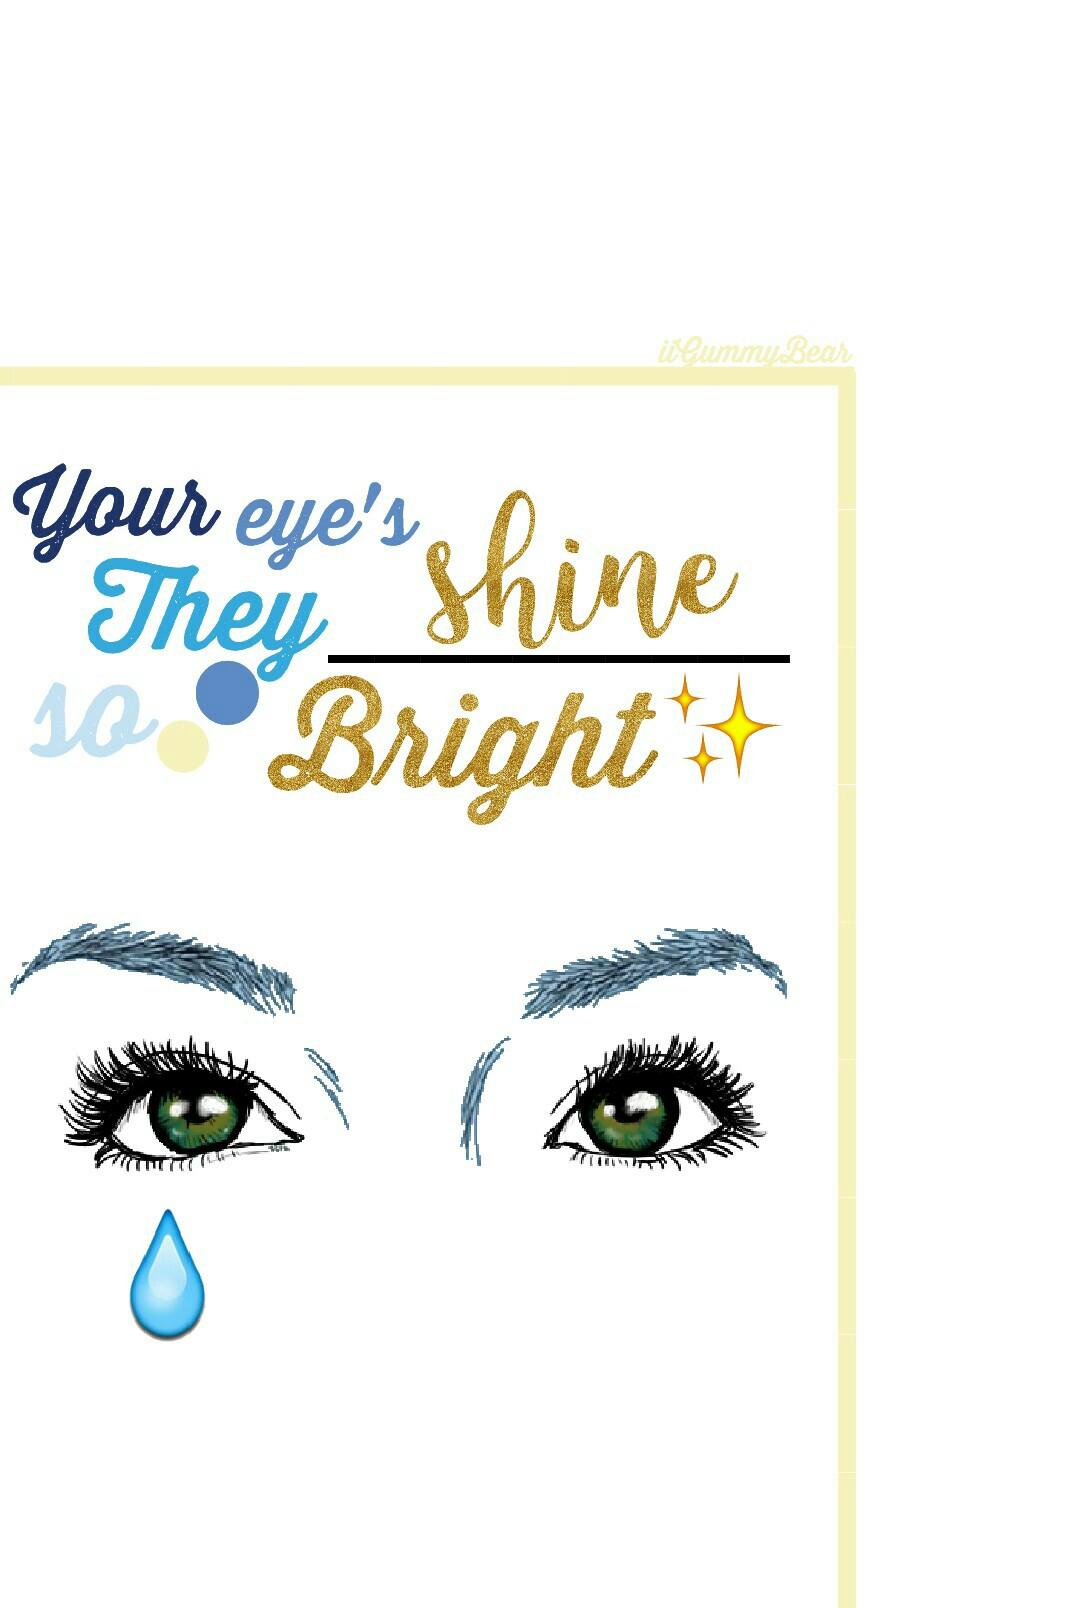 \\Tap💙?// Your eye's they shine so Bright
🌌 So don't hide your beautiful eyes💛❄ ~iiGummyBear